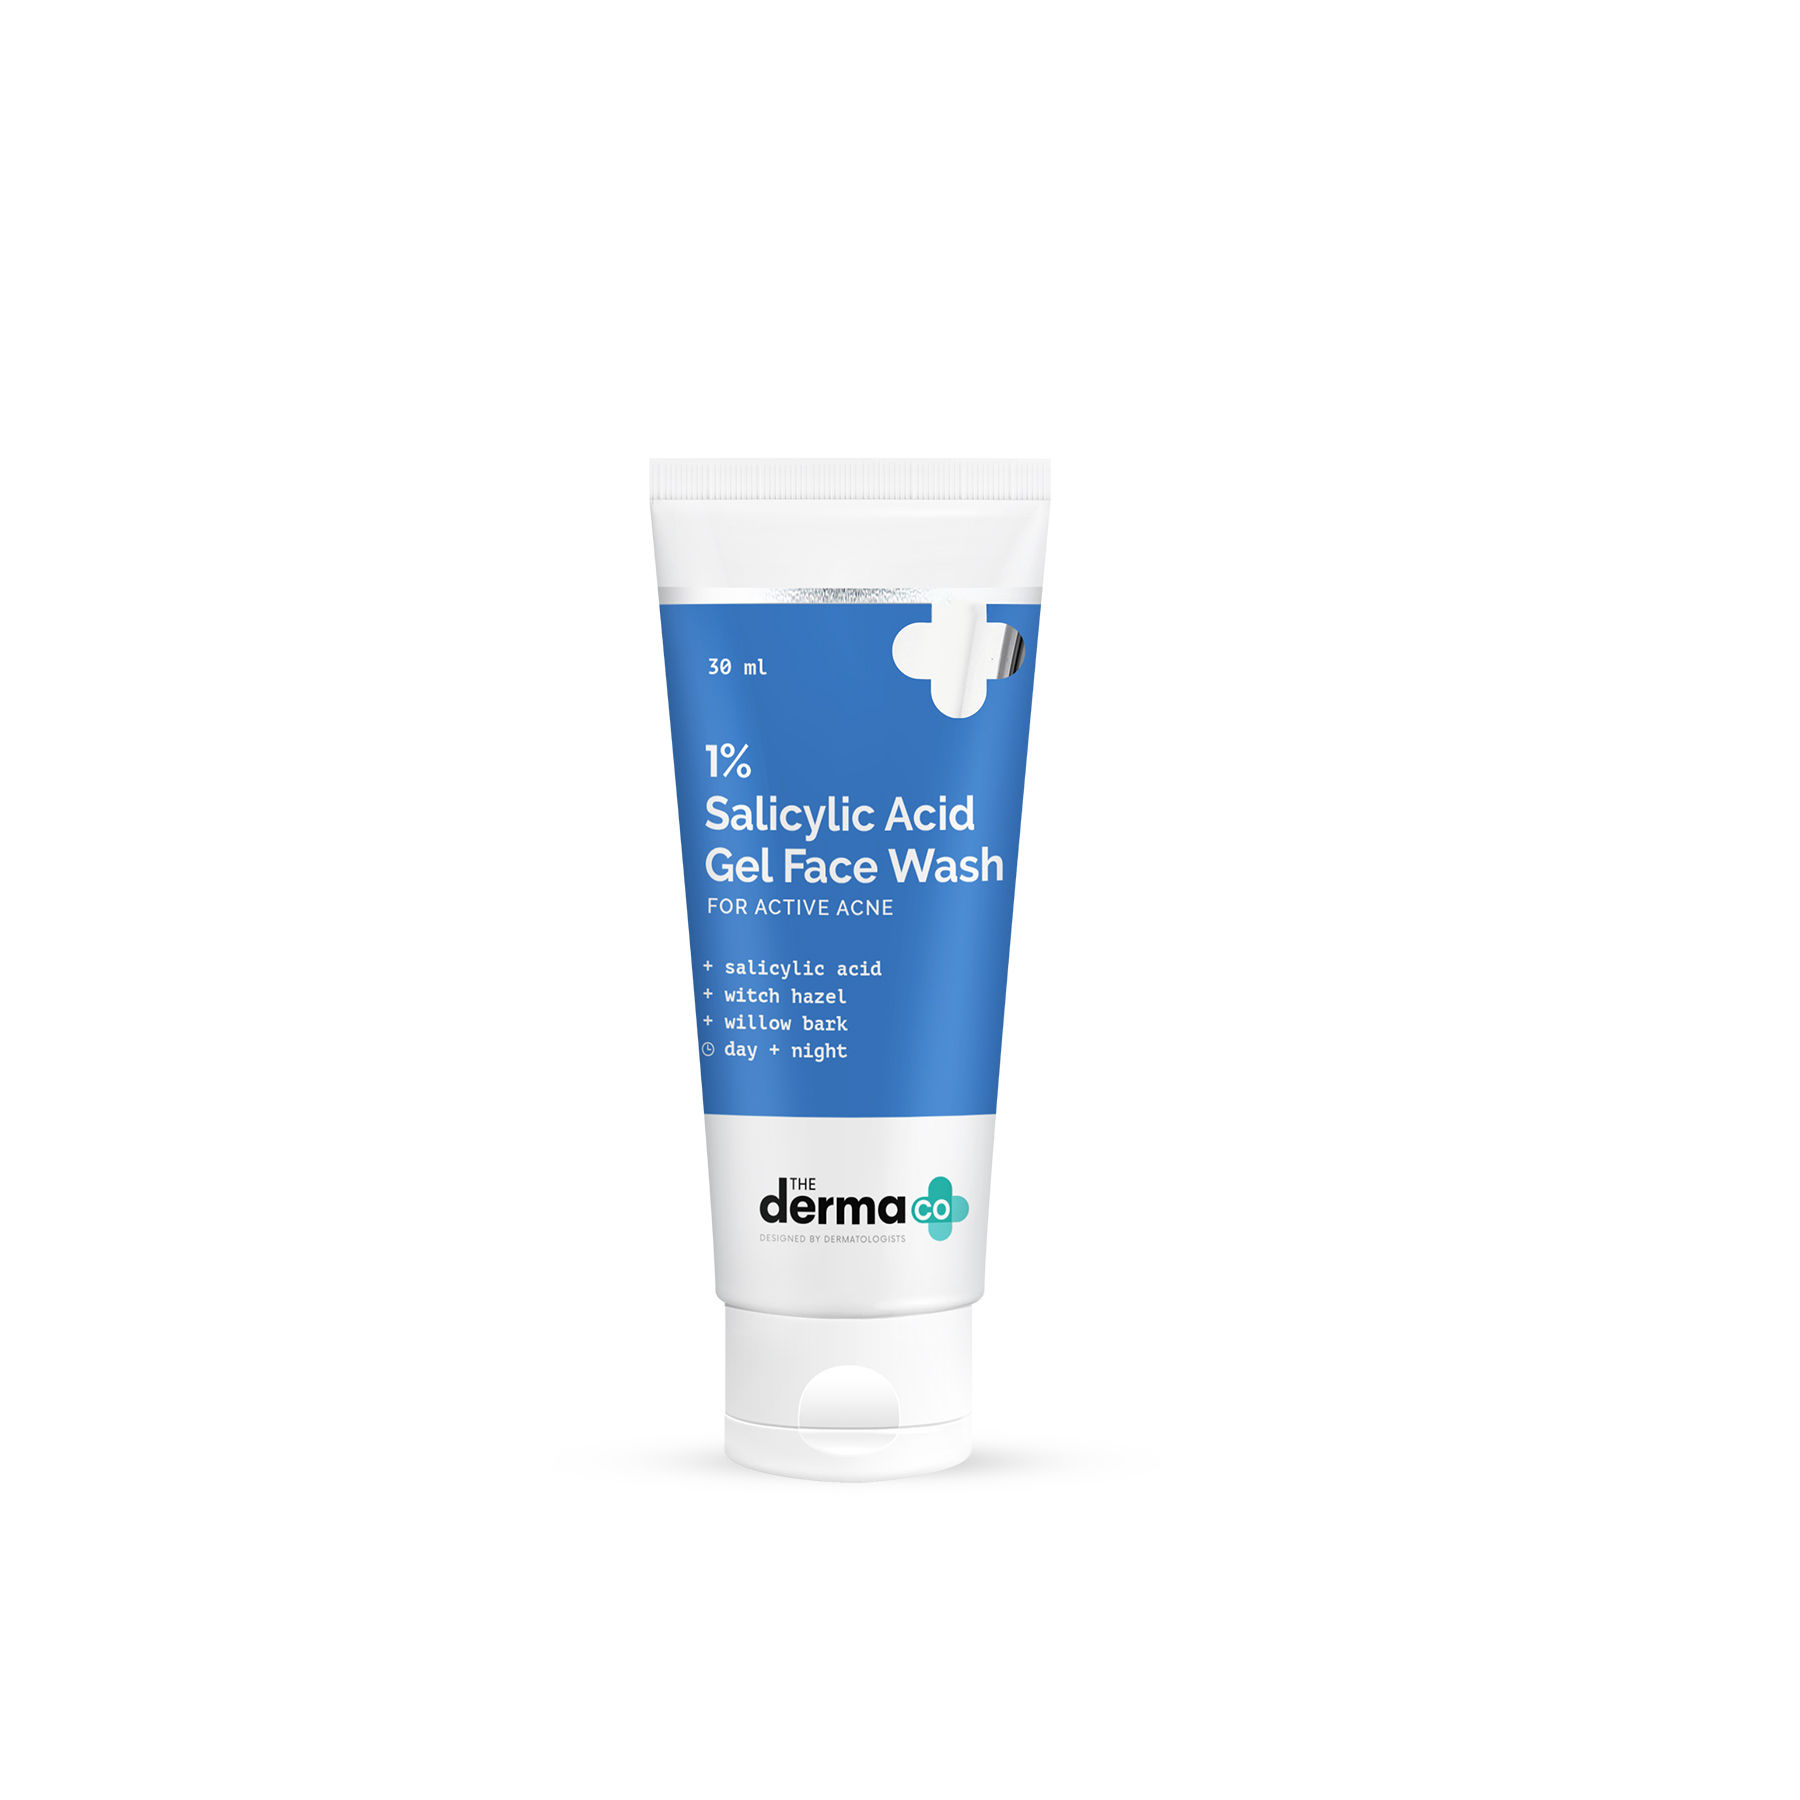 Buy The Derma Co. 1 Salicylic Acid Face Wash for Active Acne with